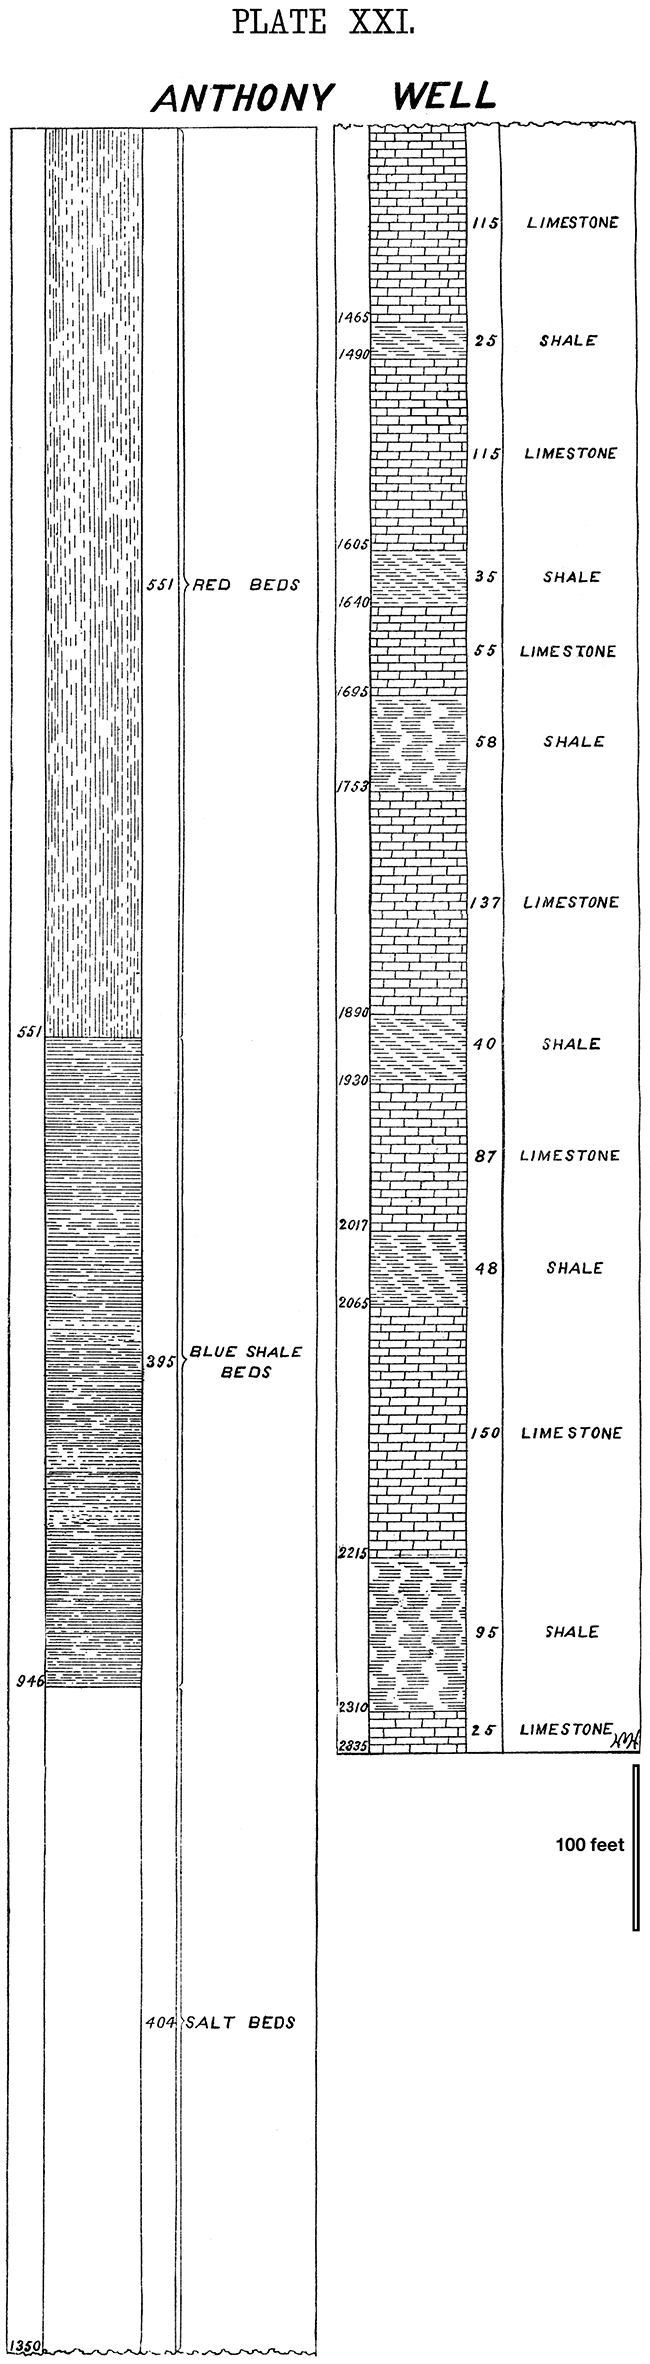 Stratigraphic columns from the Anthony well.